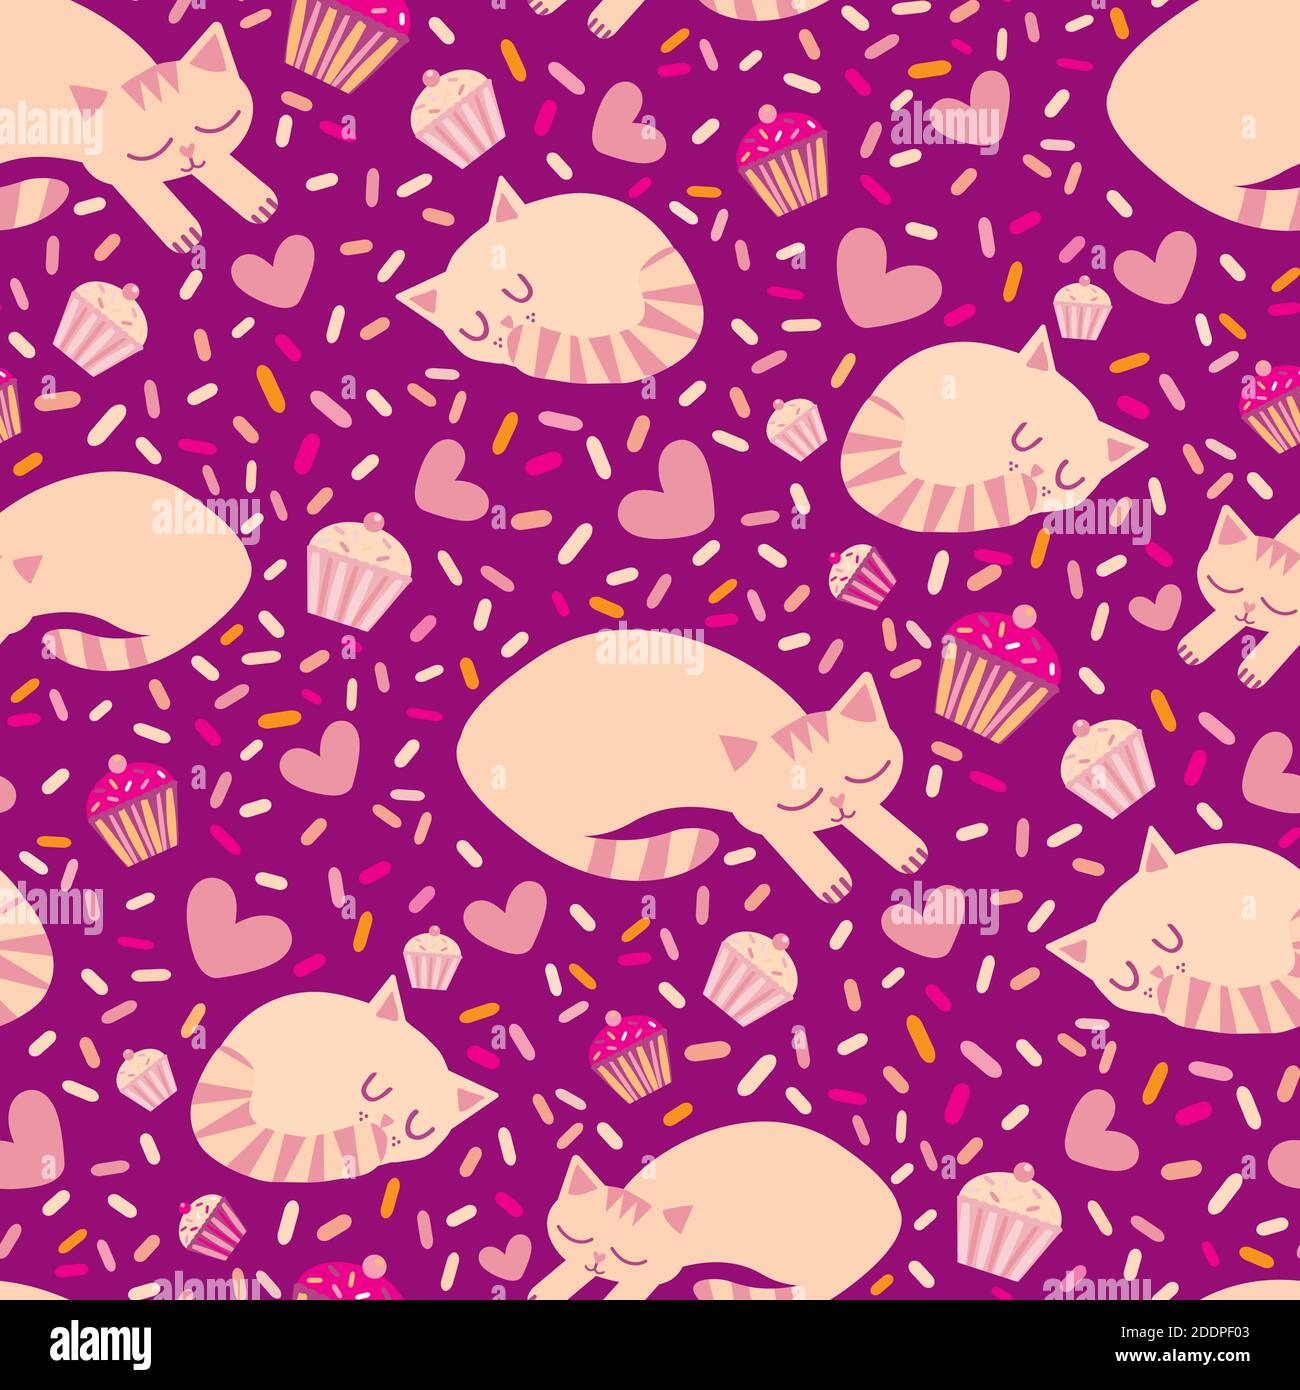 Cute sleeping kawaii cats with cupcakes, sprinkles, hearts. Vector seamless pattern background. Pink backdrop with stretching, curled up cartoon Stock Vector